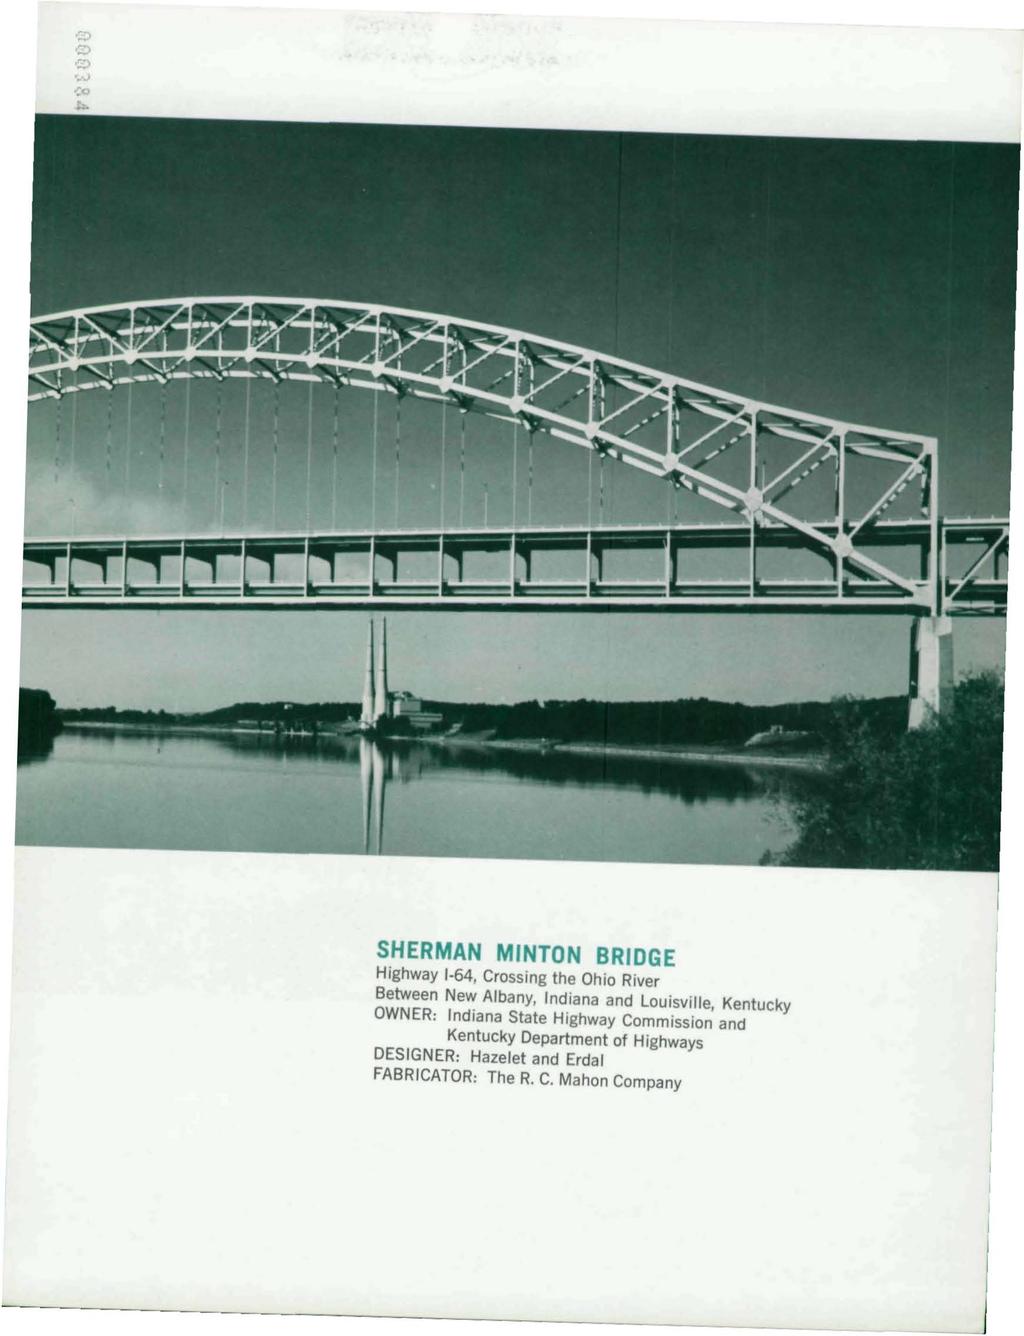 '. :0 SHERMAN MINTON BRIDGE Highway 1 64, Crossing the Ohio River Between New Albany, Indiana and Louisville, Kentucky OWNER: